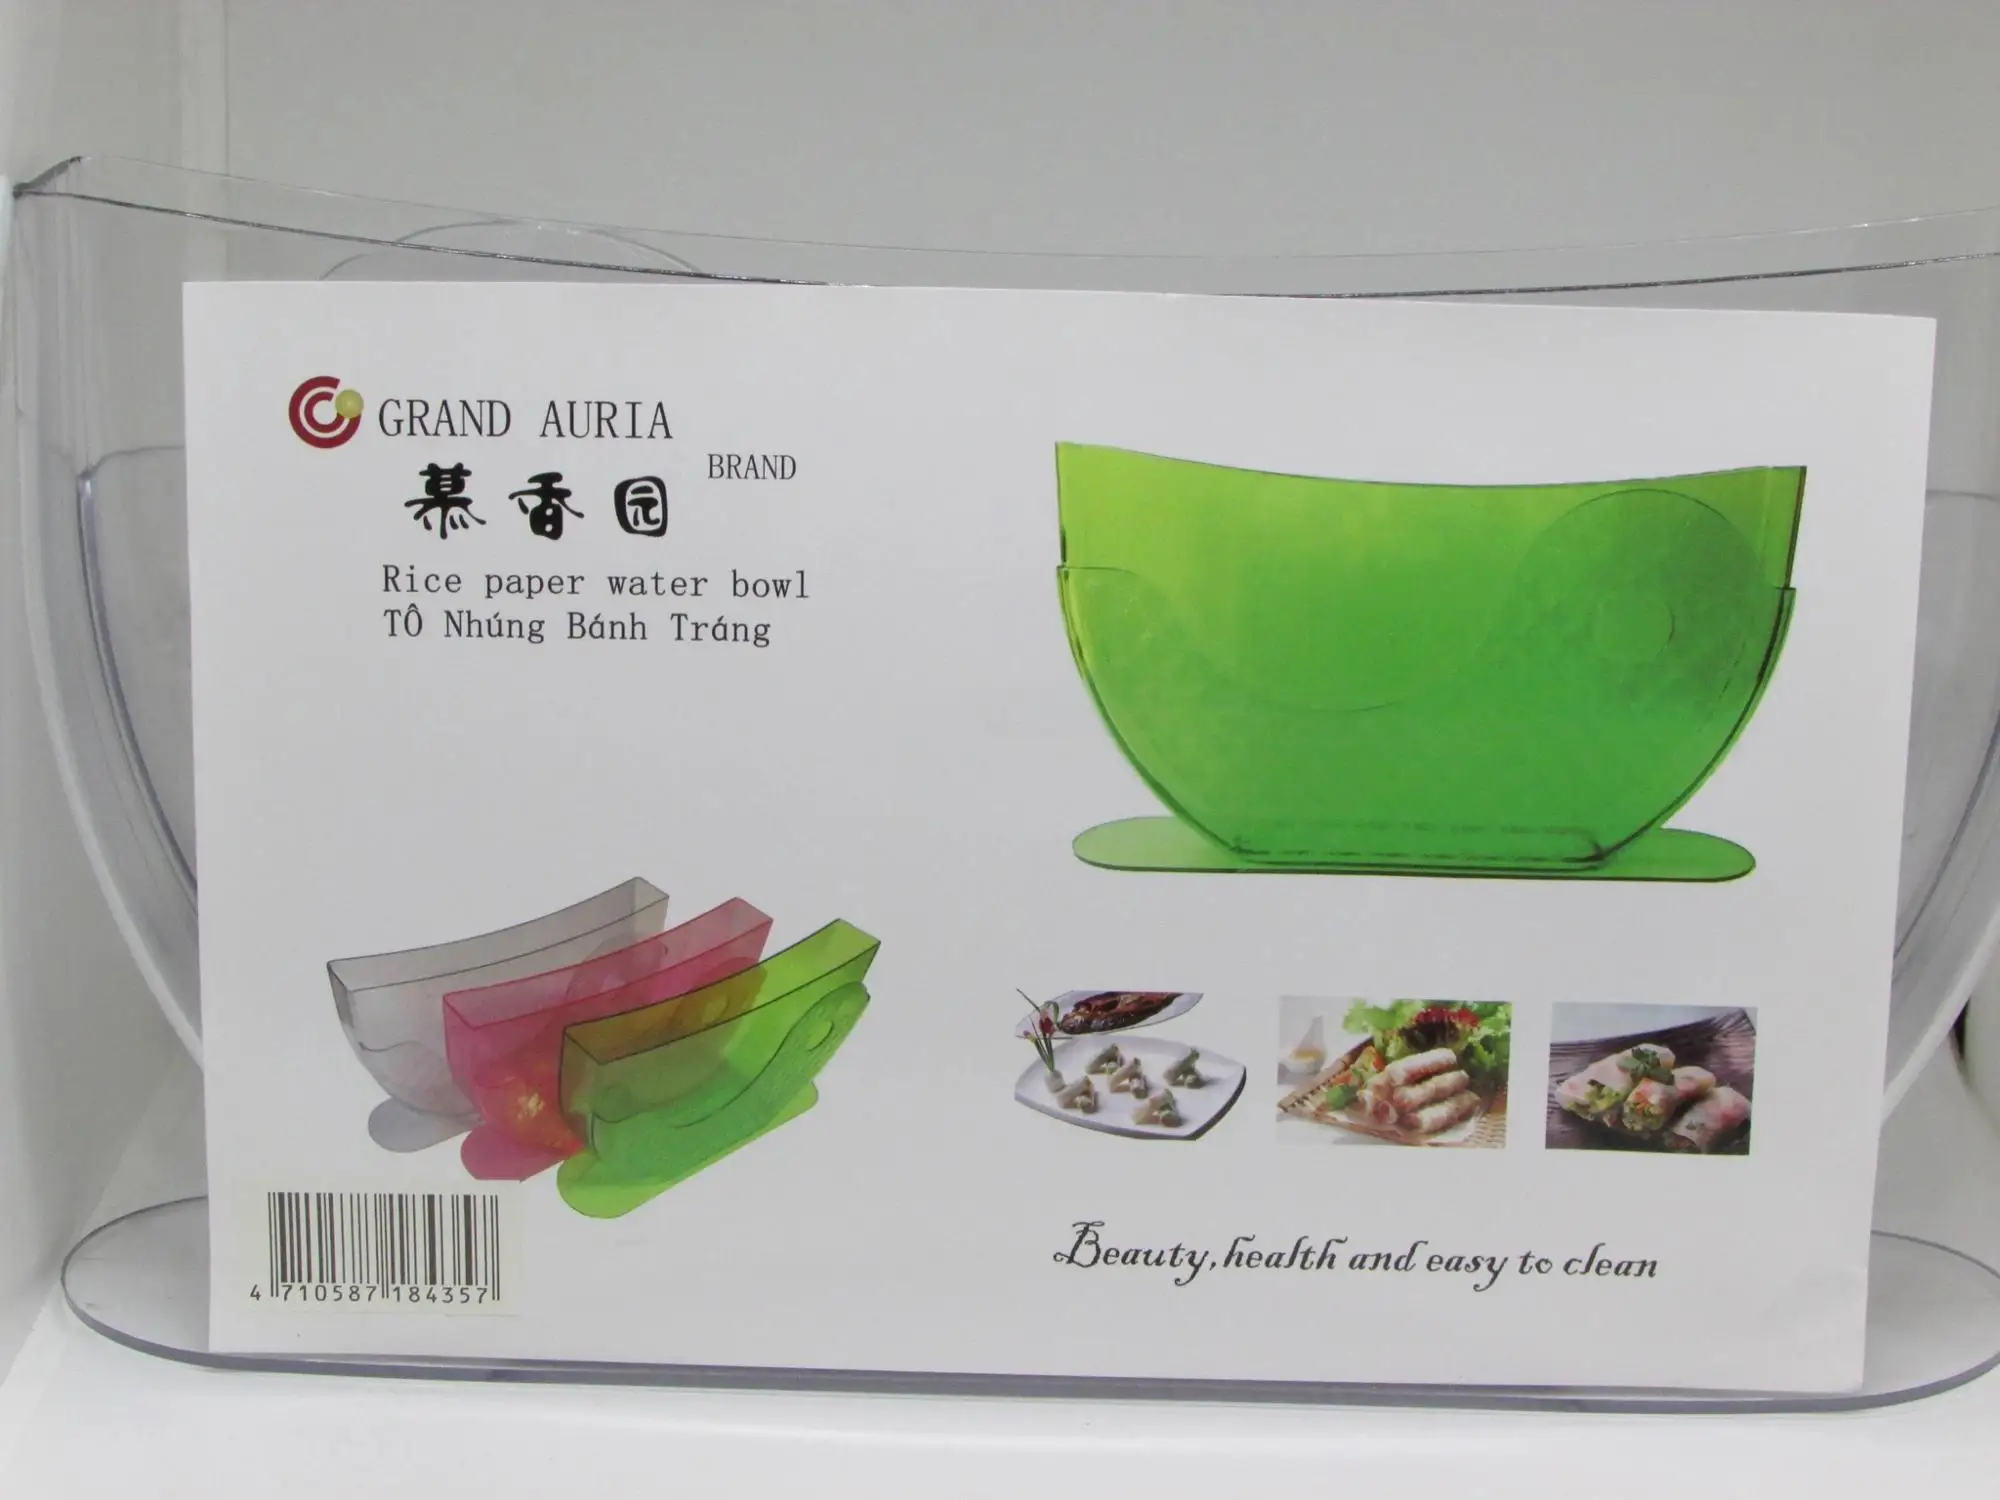 Octflor RICE PAPER WATER BOWL WITH SIDE POCKET HOLDER HOLDS UP TO 27cm Rice Paper for making Fresh Spring Rolls Rice Paper Not Included 